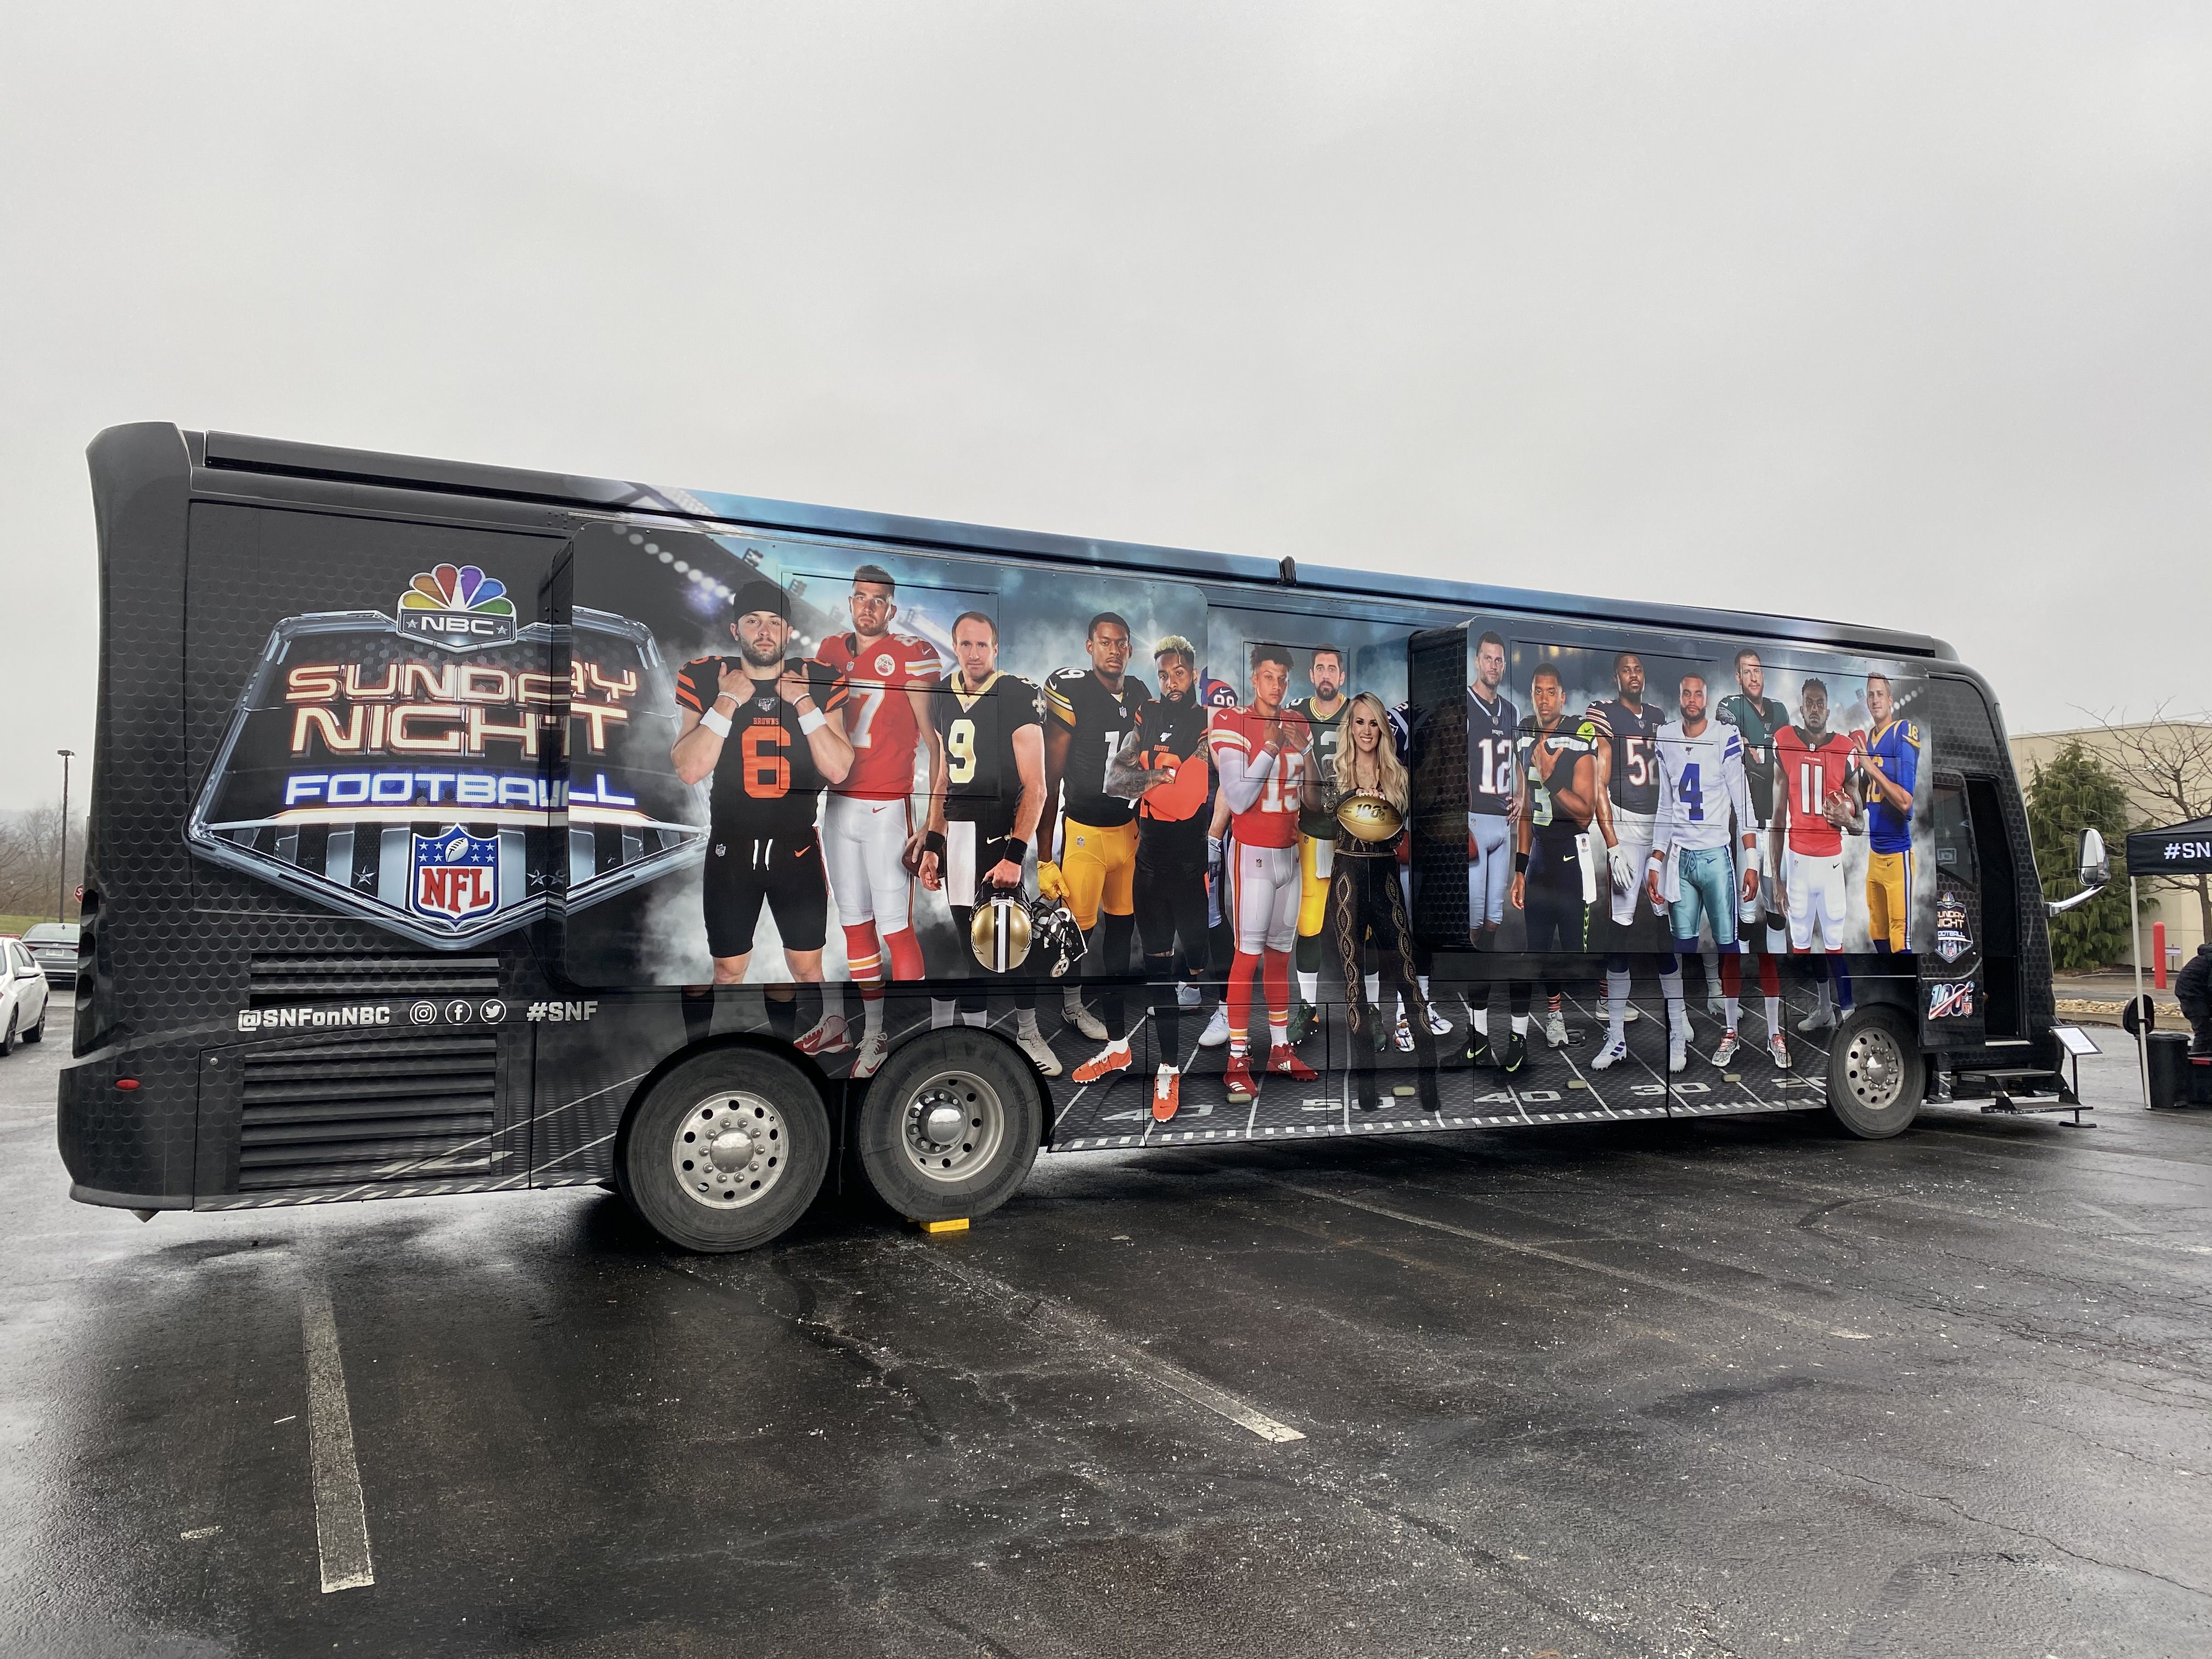 Tour the NBC Sunday Night Football Bus - Follow The Wire